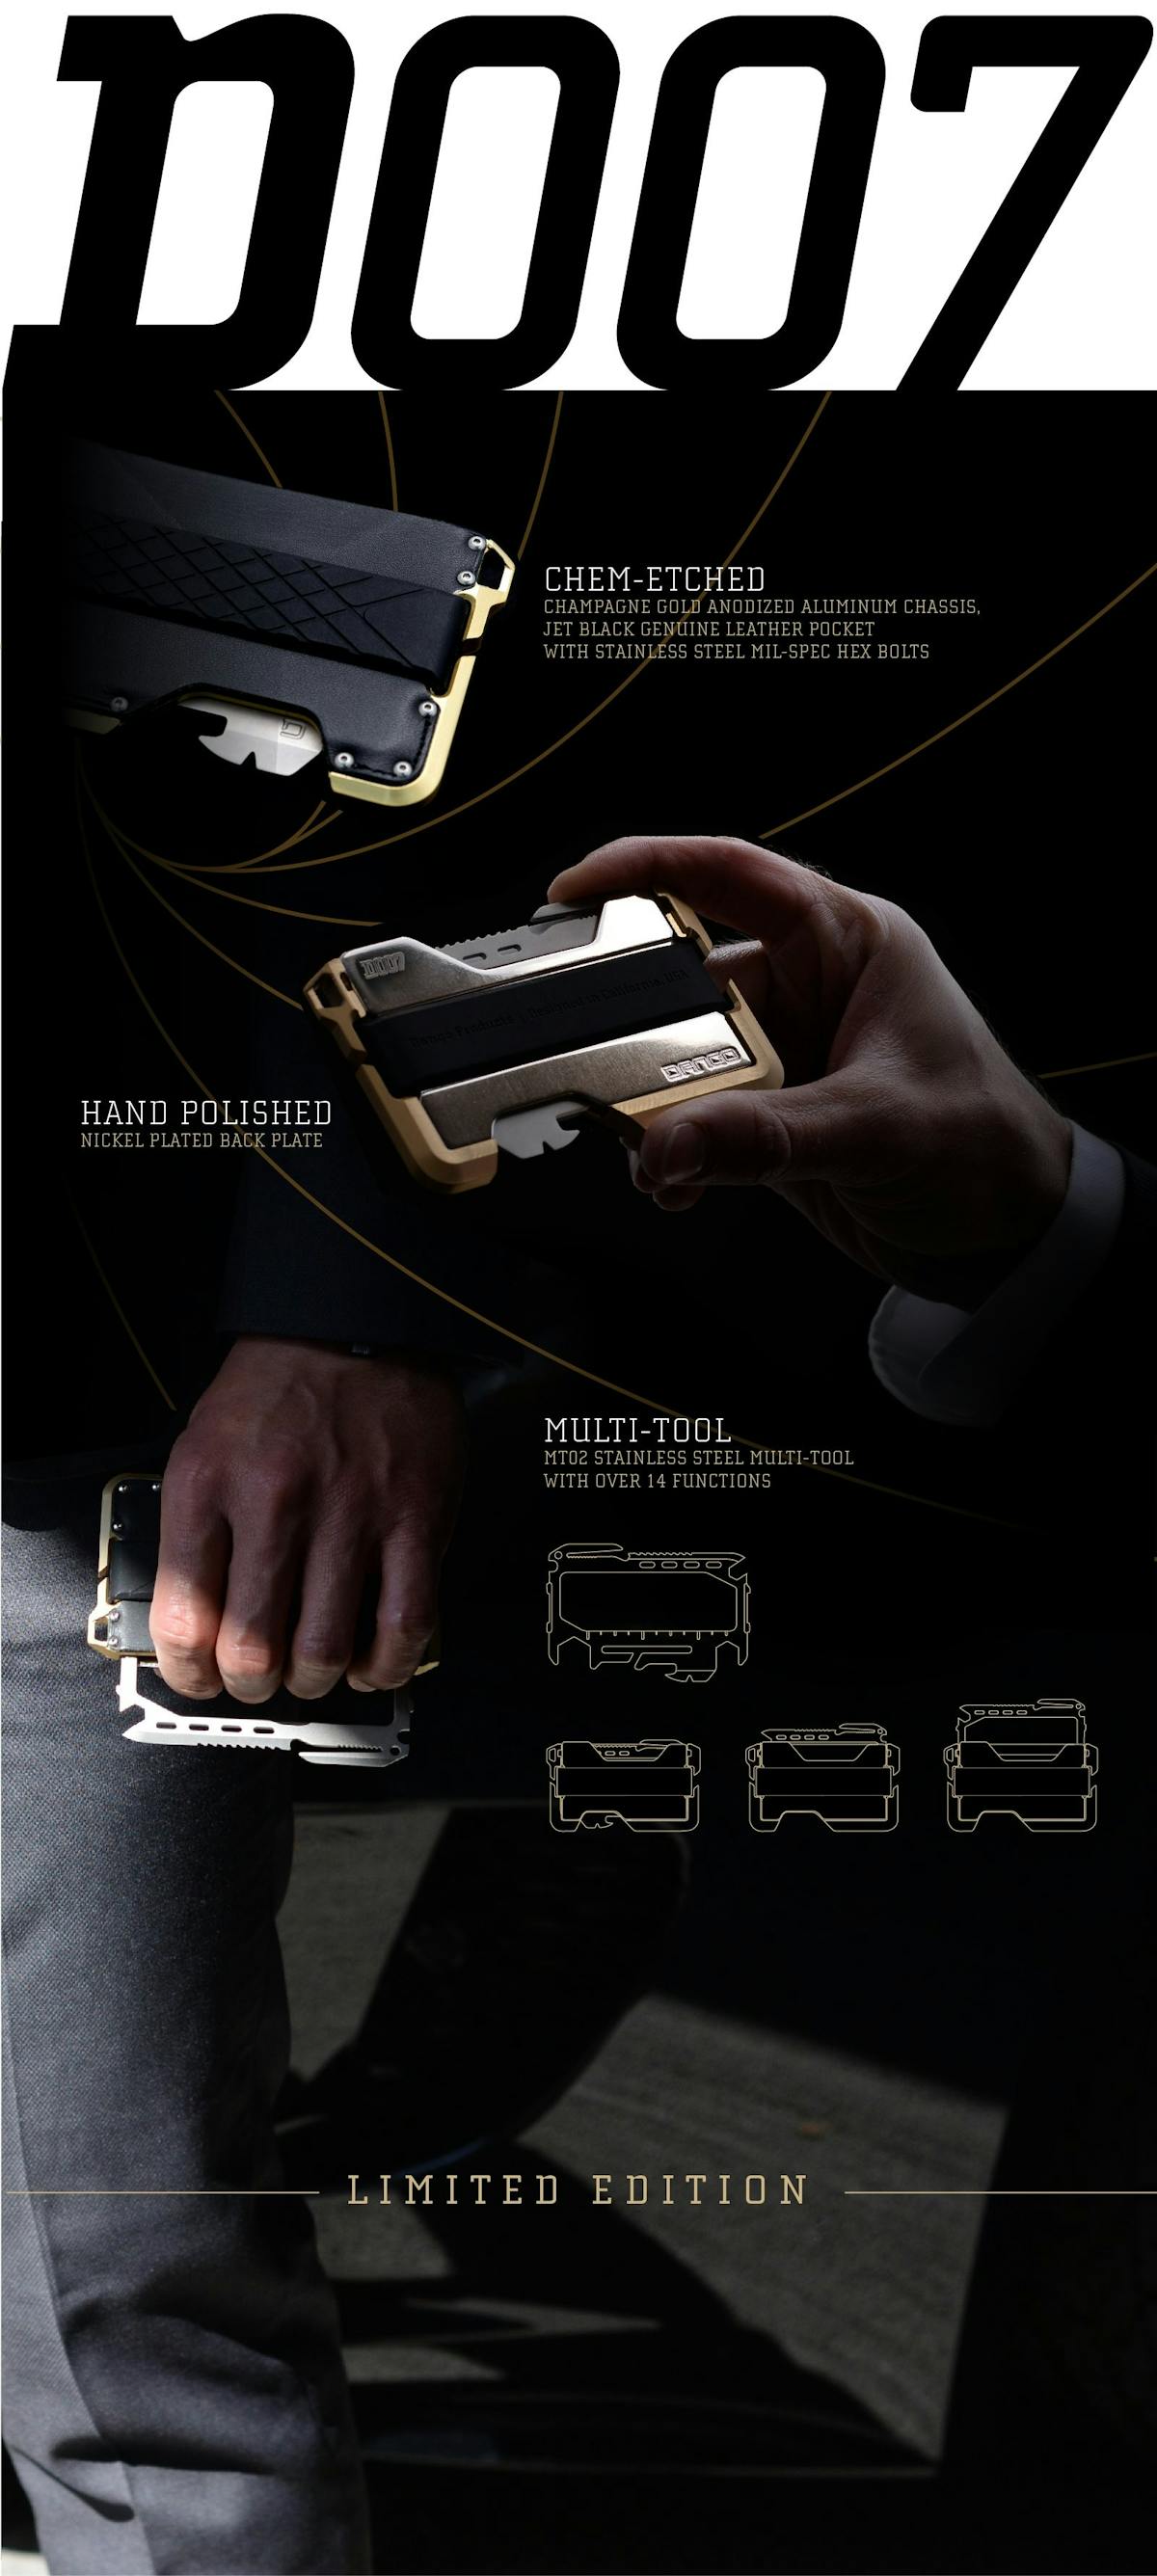 D007 Limited Edition Wallet